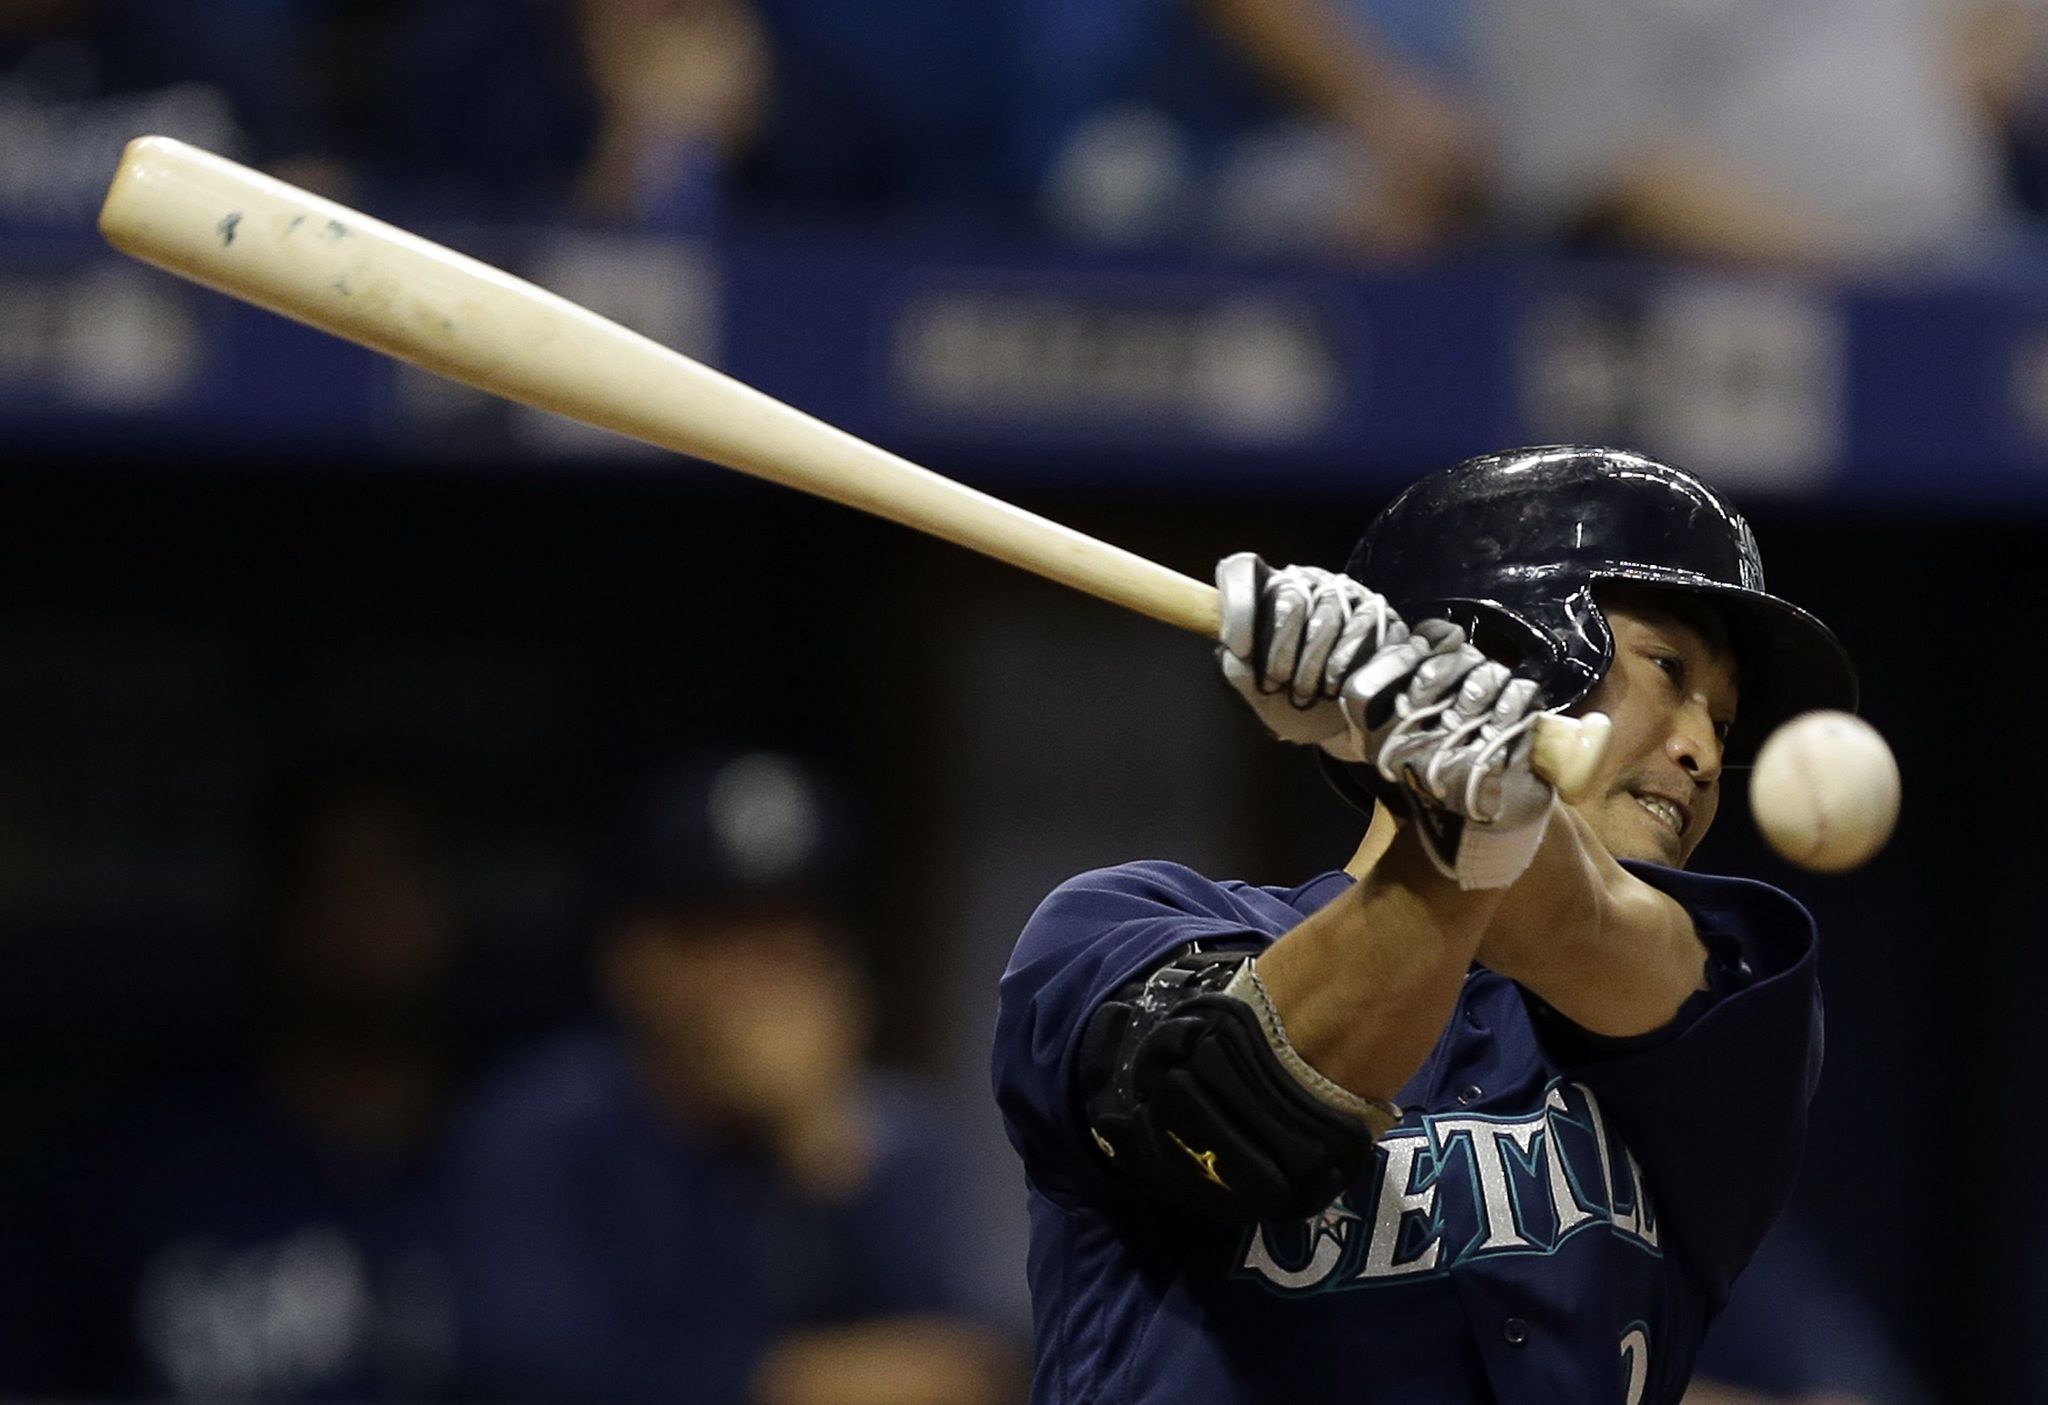 The Mariners’ Nori Aoki fouls off a pitch during Wednesday’s game against the Rays in Tampa Bay.